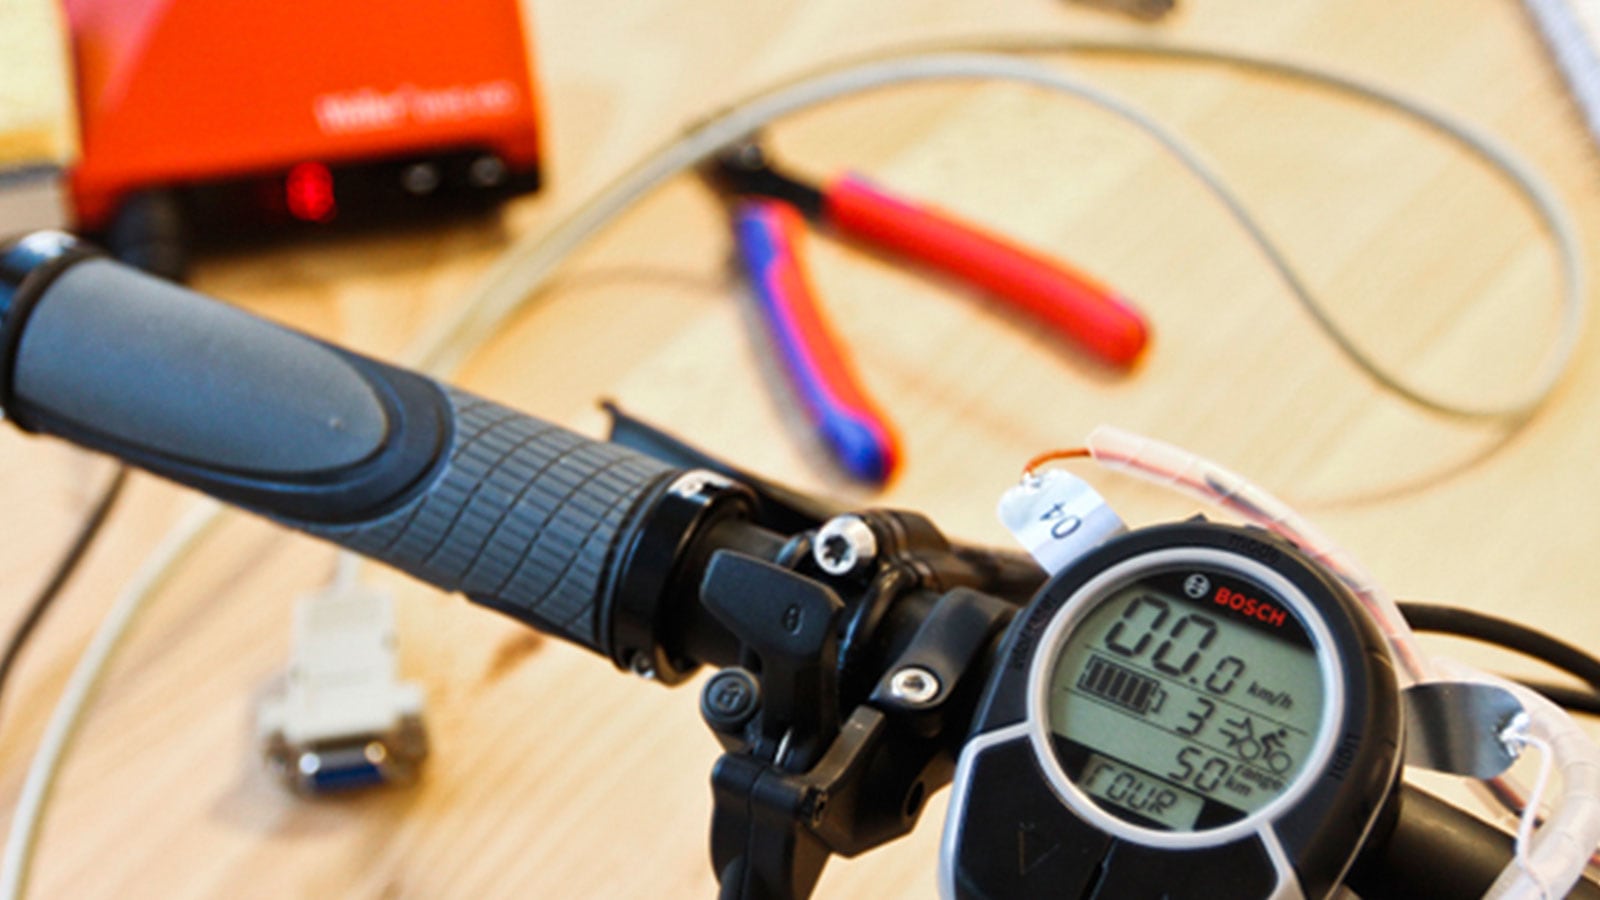 Making things talk: I want to hack my bicycle